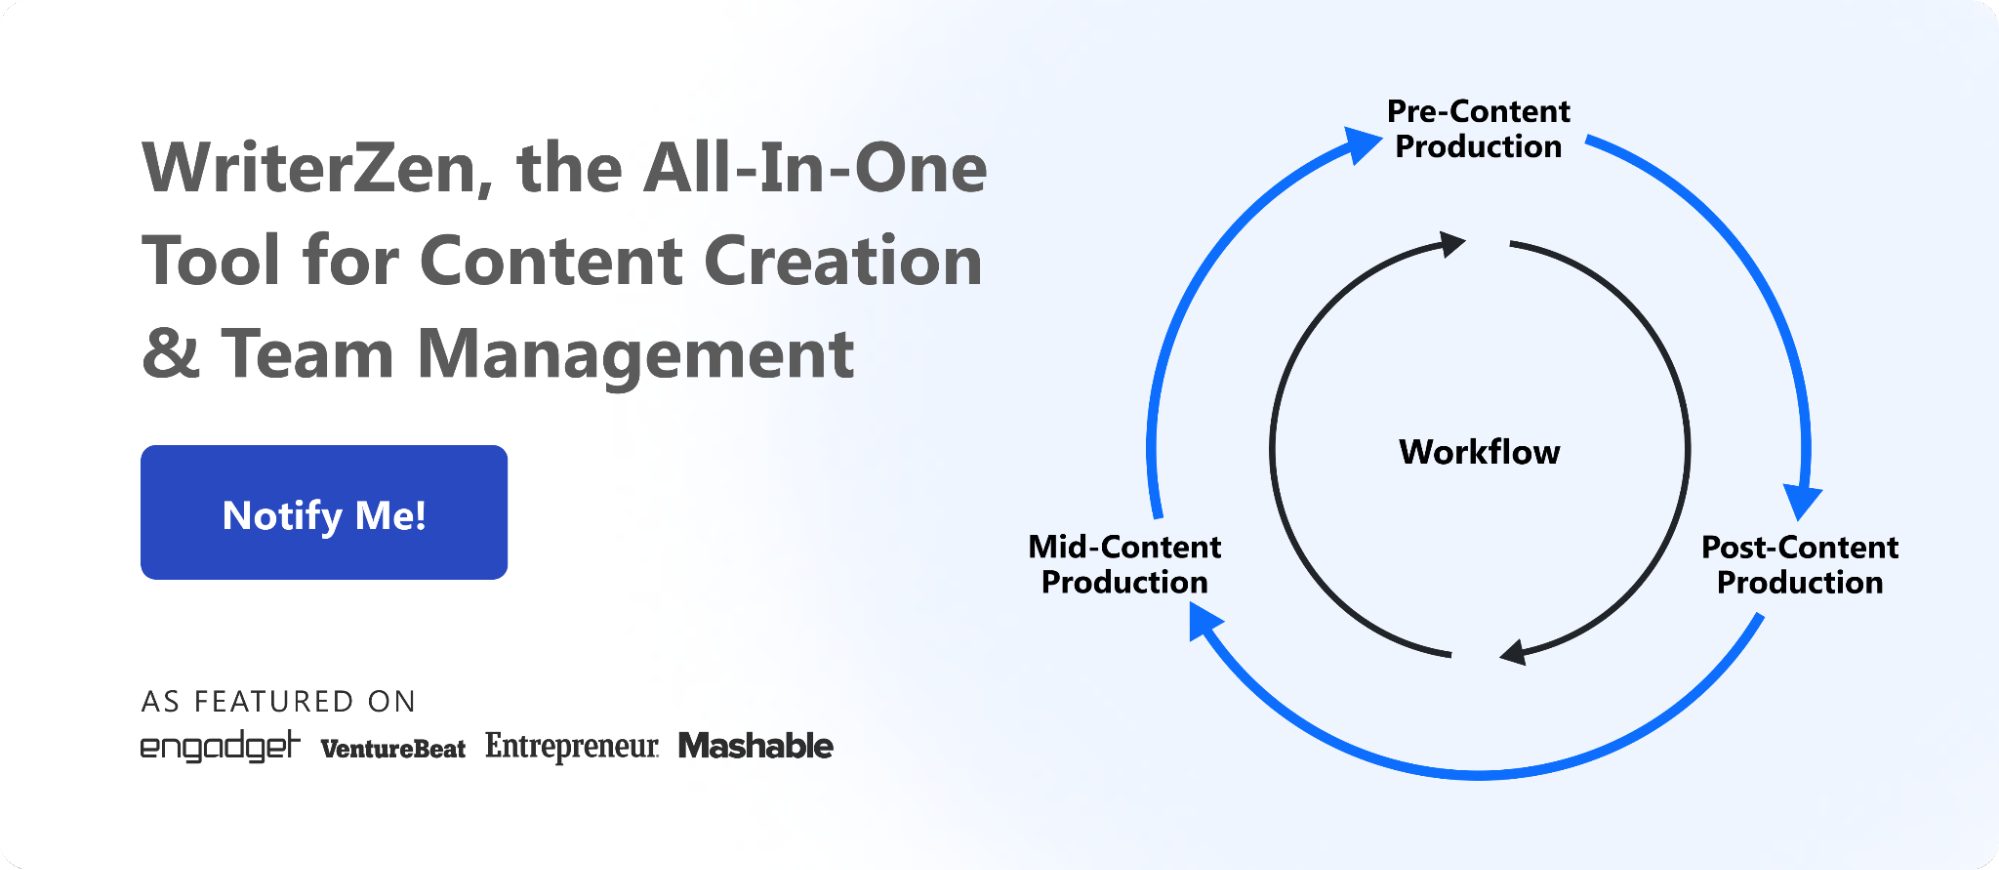 Tool for Content Creation and Team Management